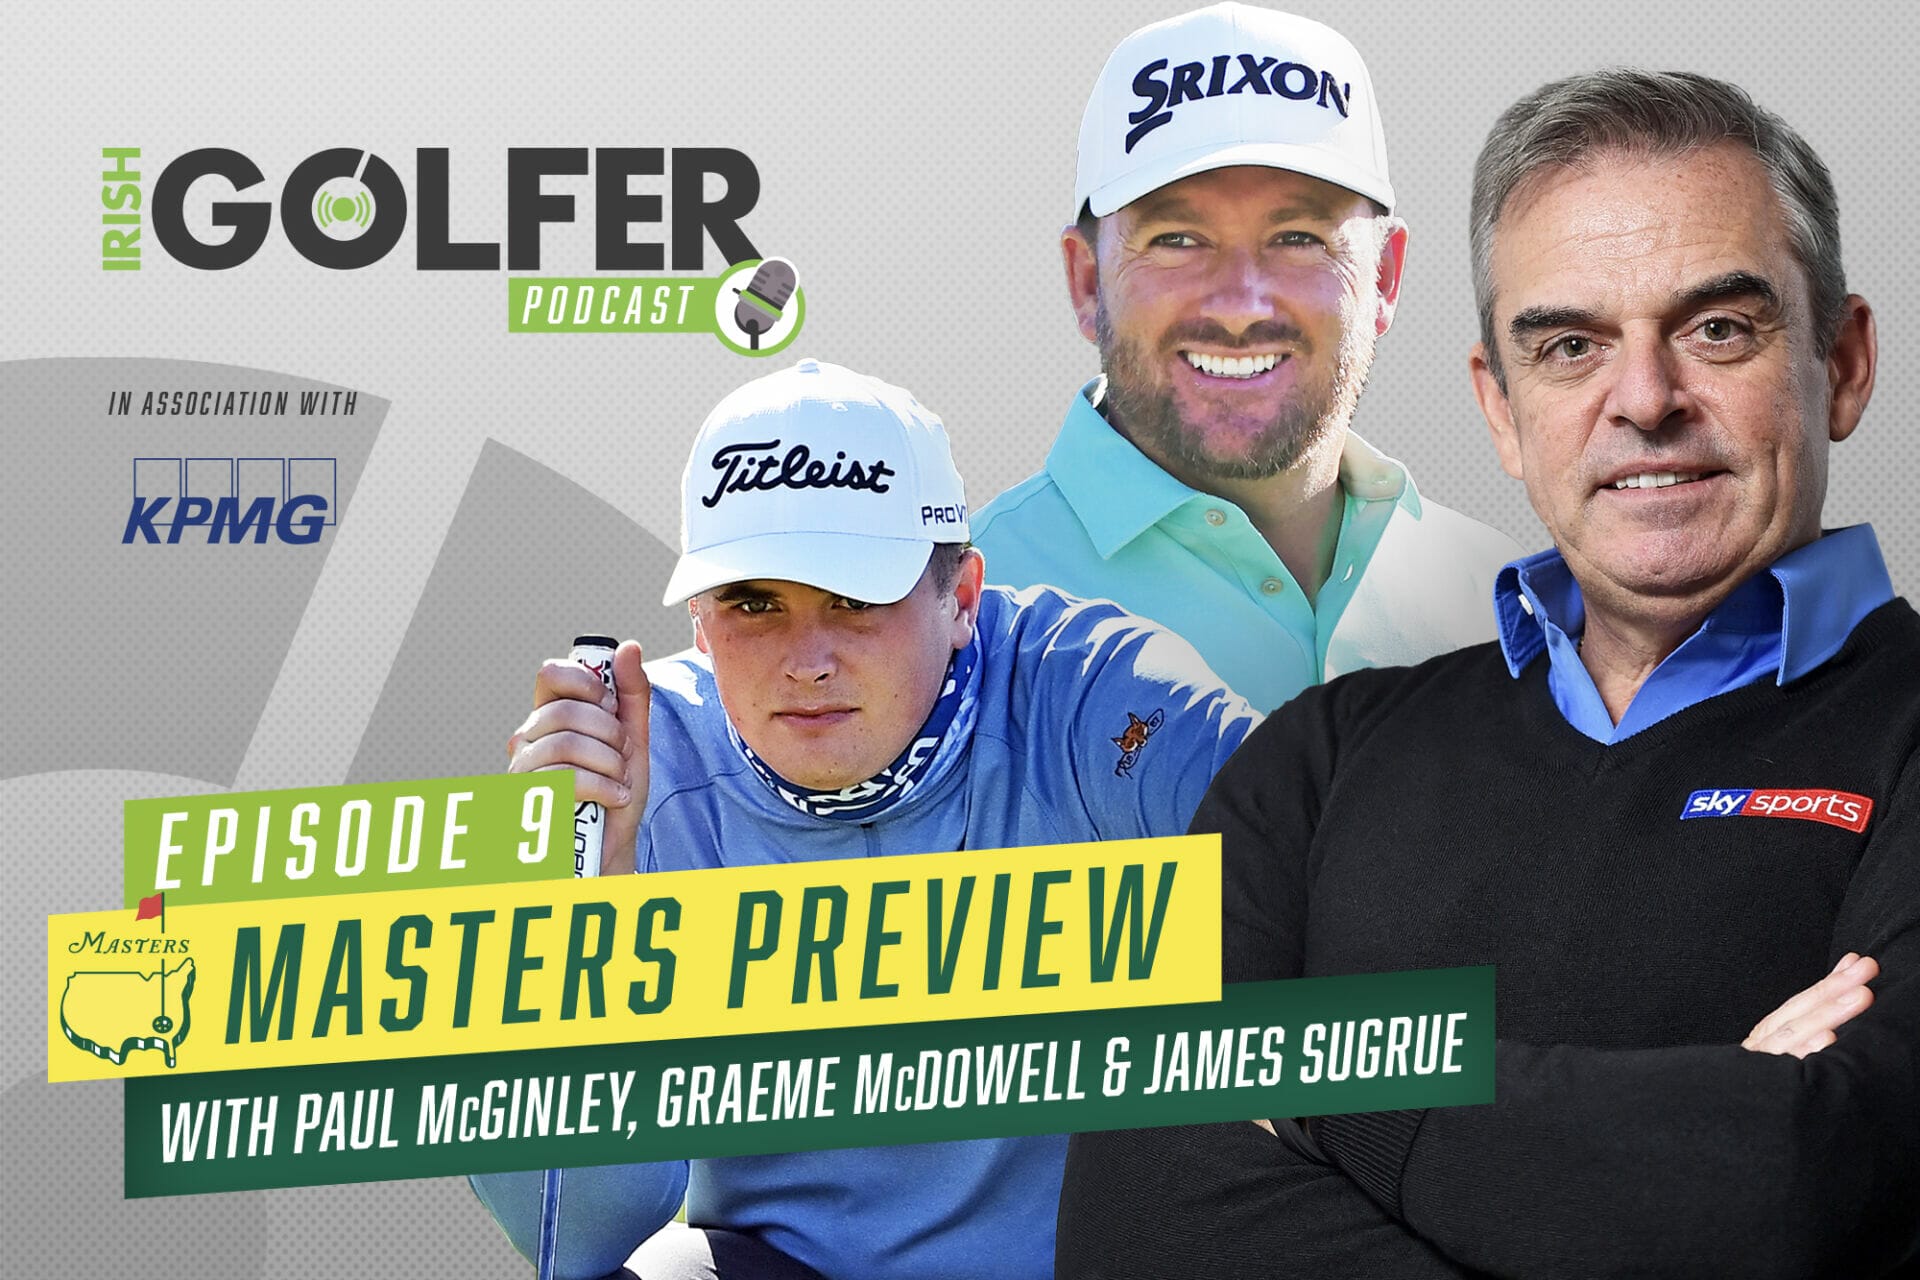 Irish Golfer Podcast | Masters Preview Paul McGinley, GMac & James Sugrue | Episode 9